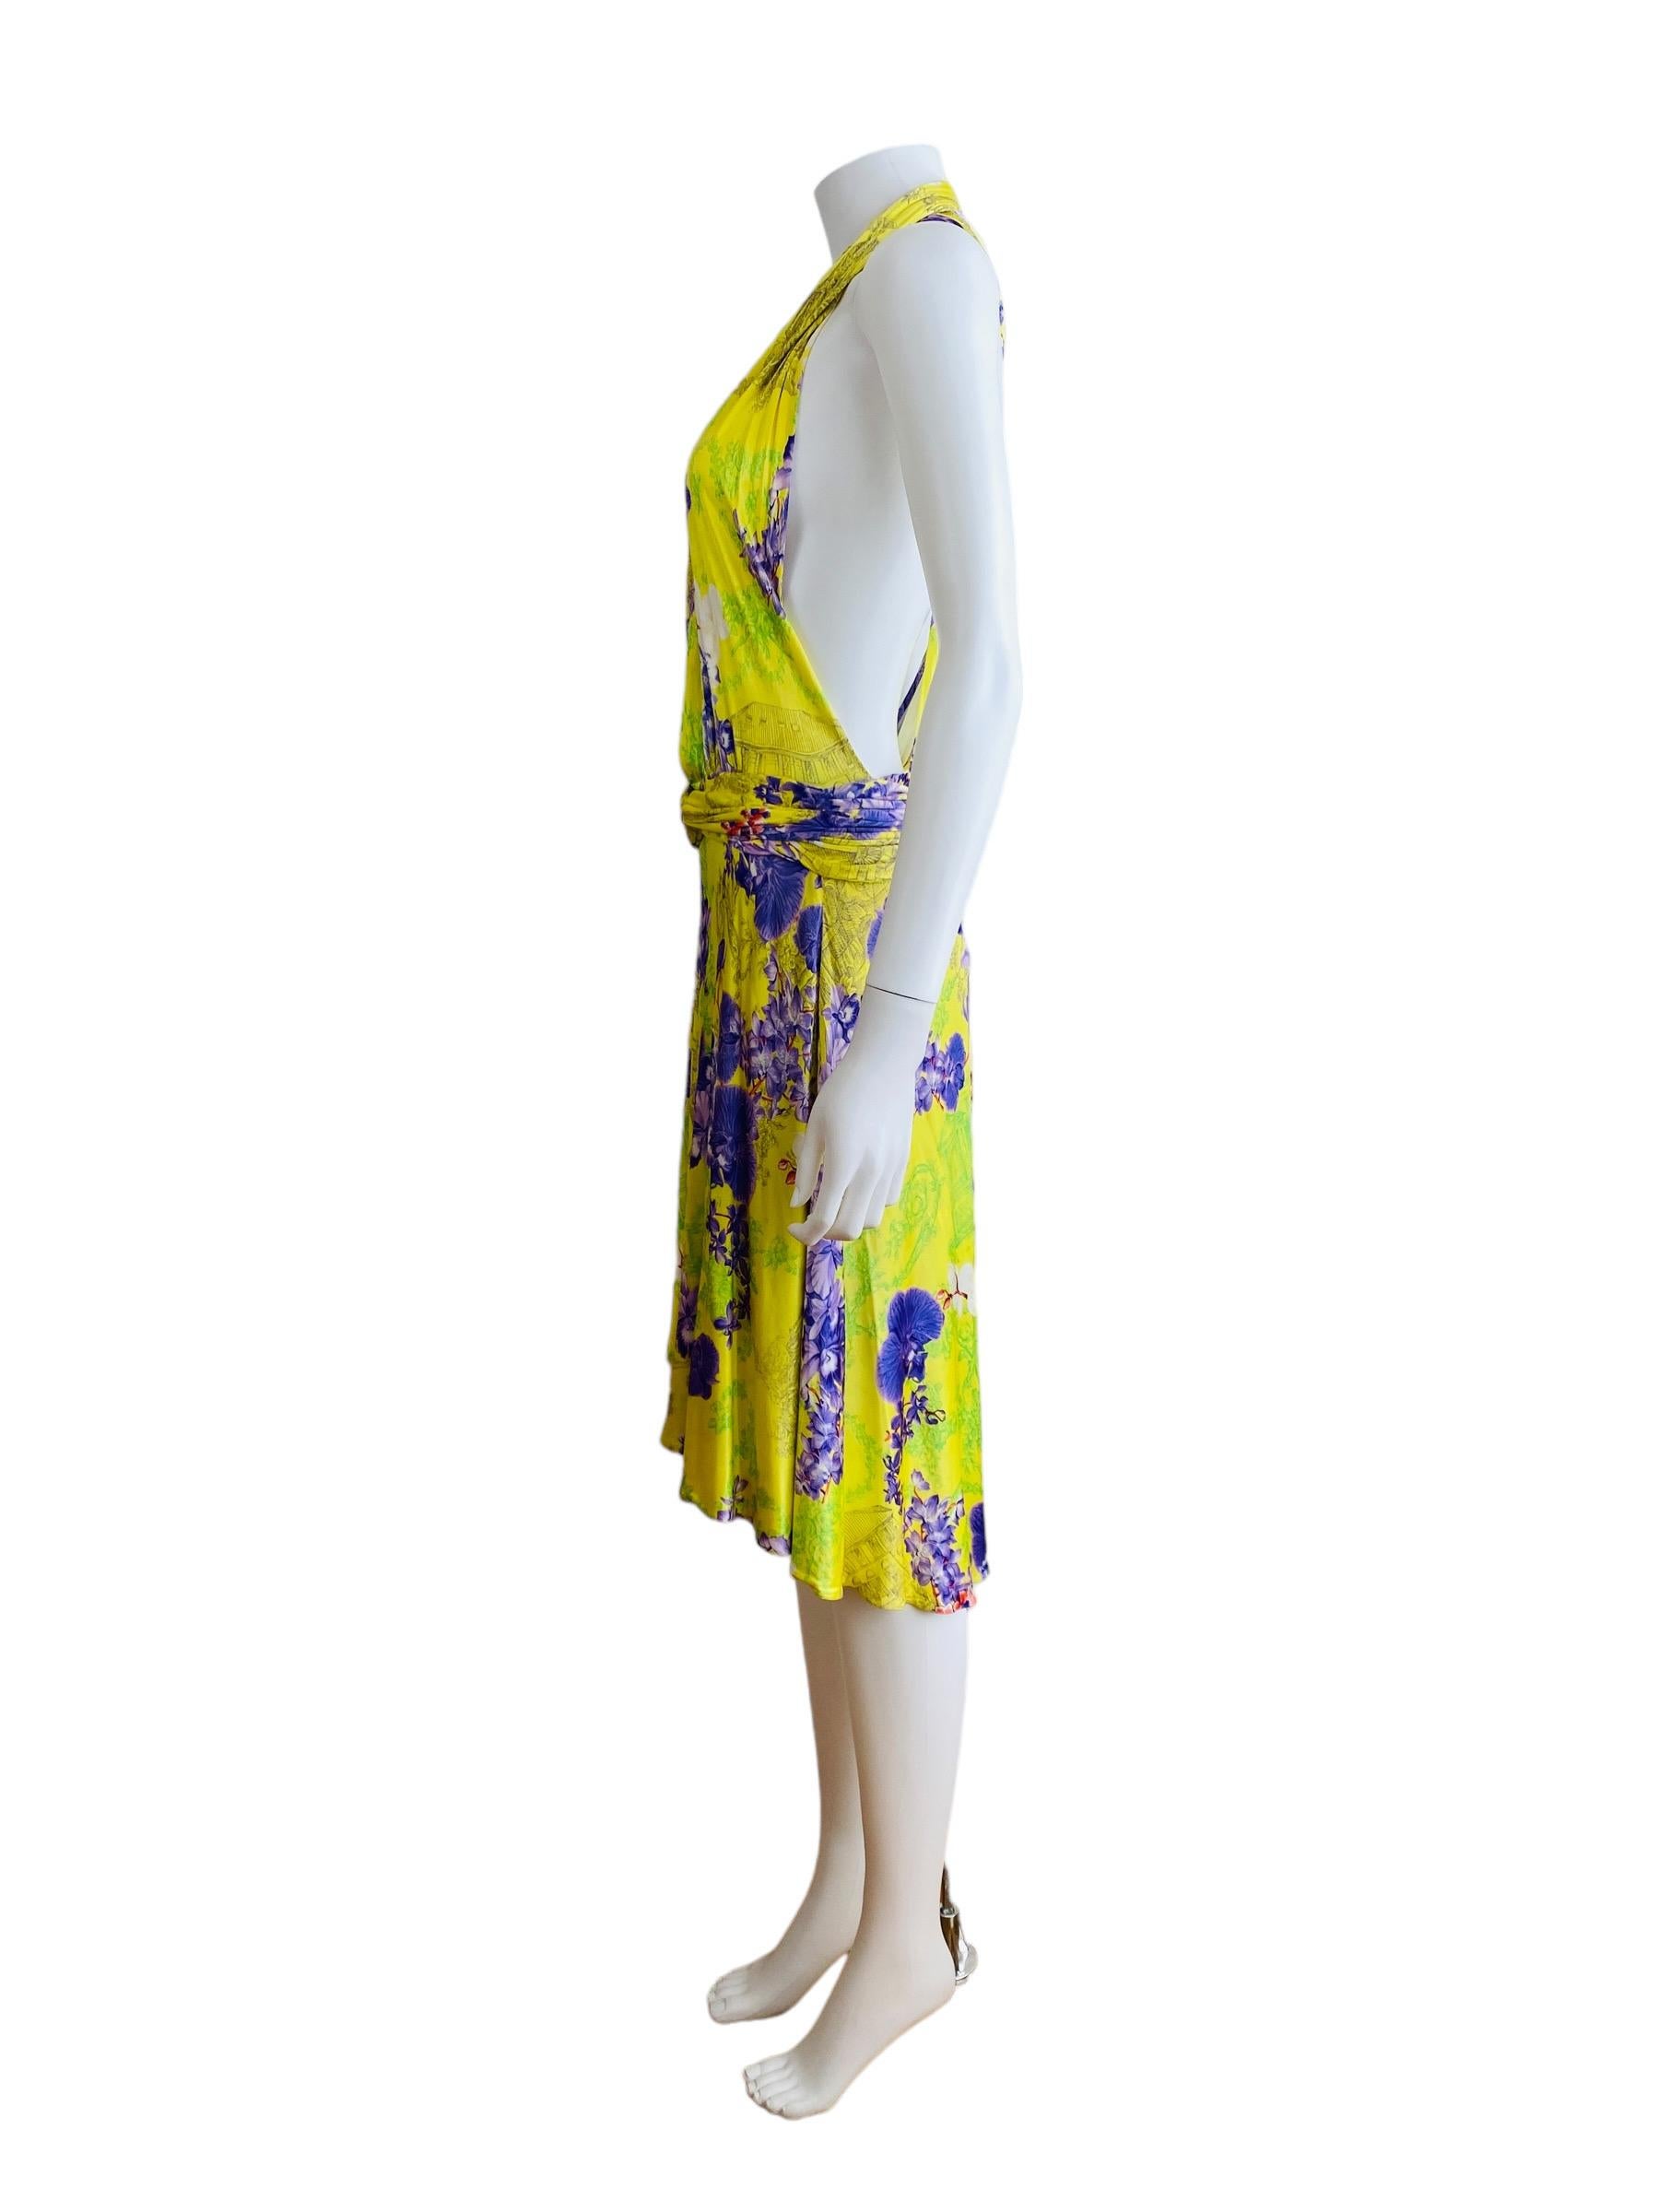 Vintage S/S 2004 Versace Dress Bright Yellow + Purple Orchid Floral Runway For Sale 7